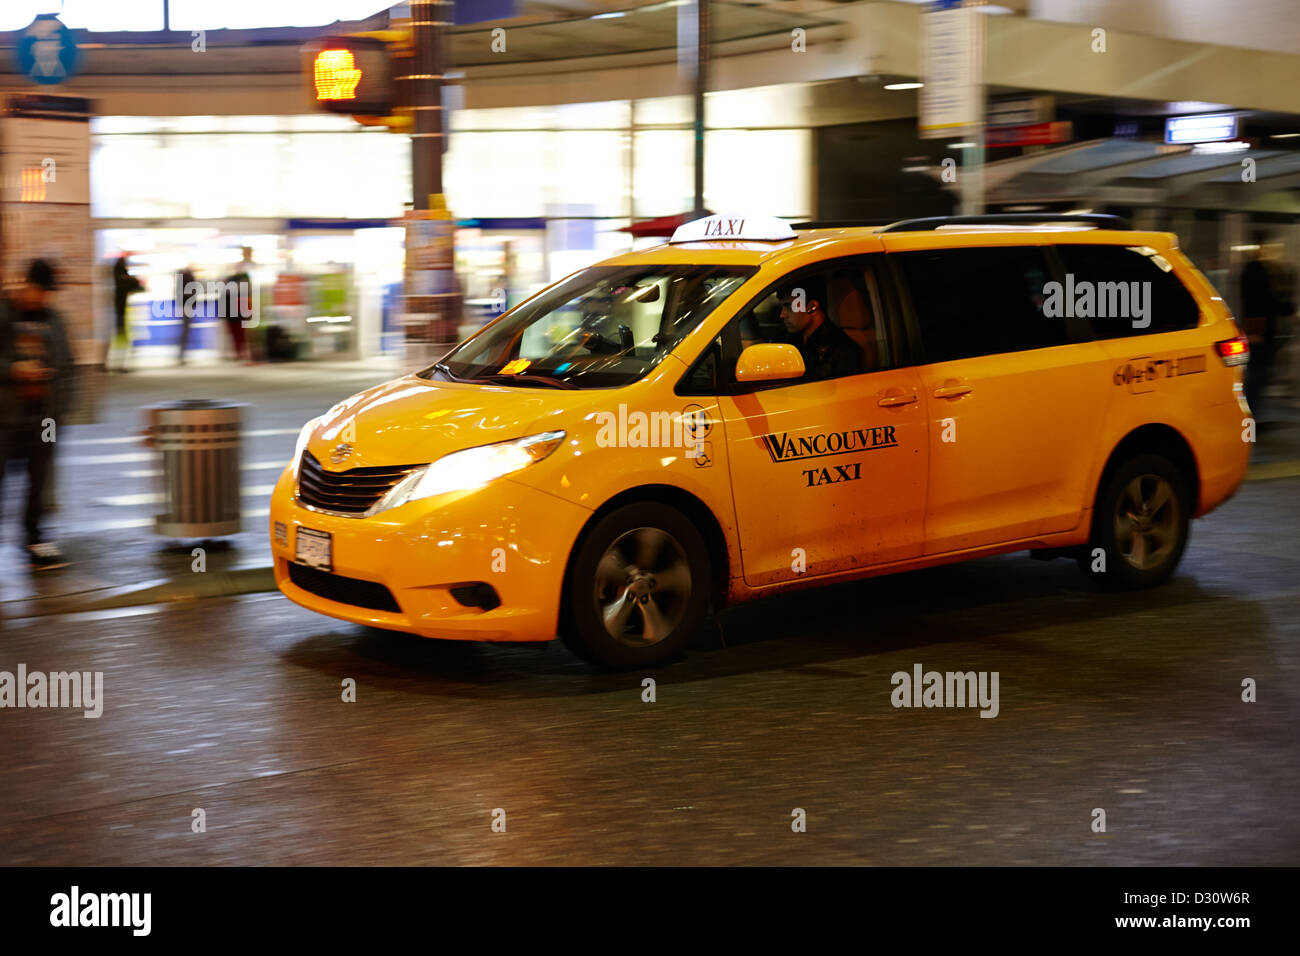 yellow cab taxi downtown Vancouver city shopping area at night BC Canada deliberate motion blur Stock Photo